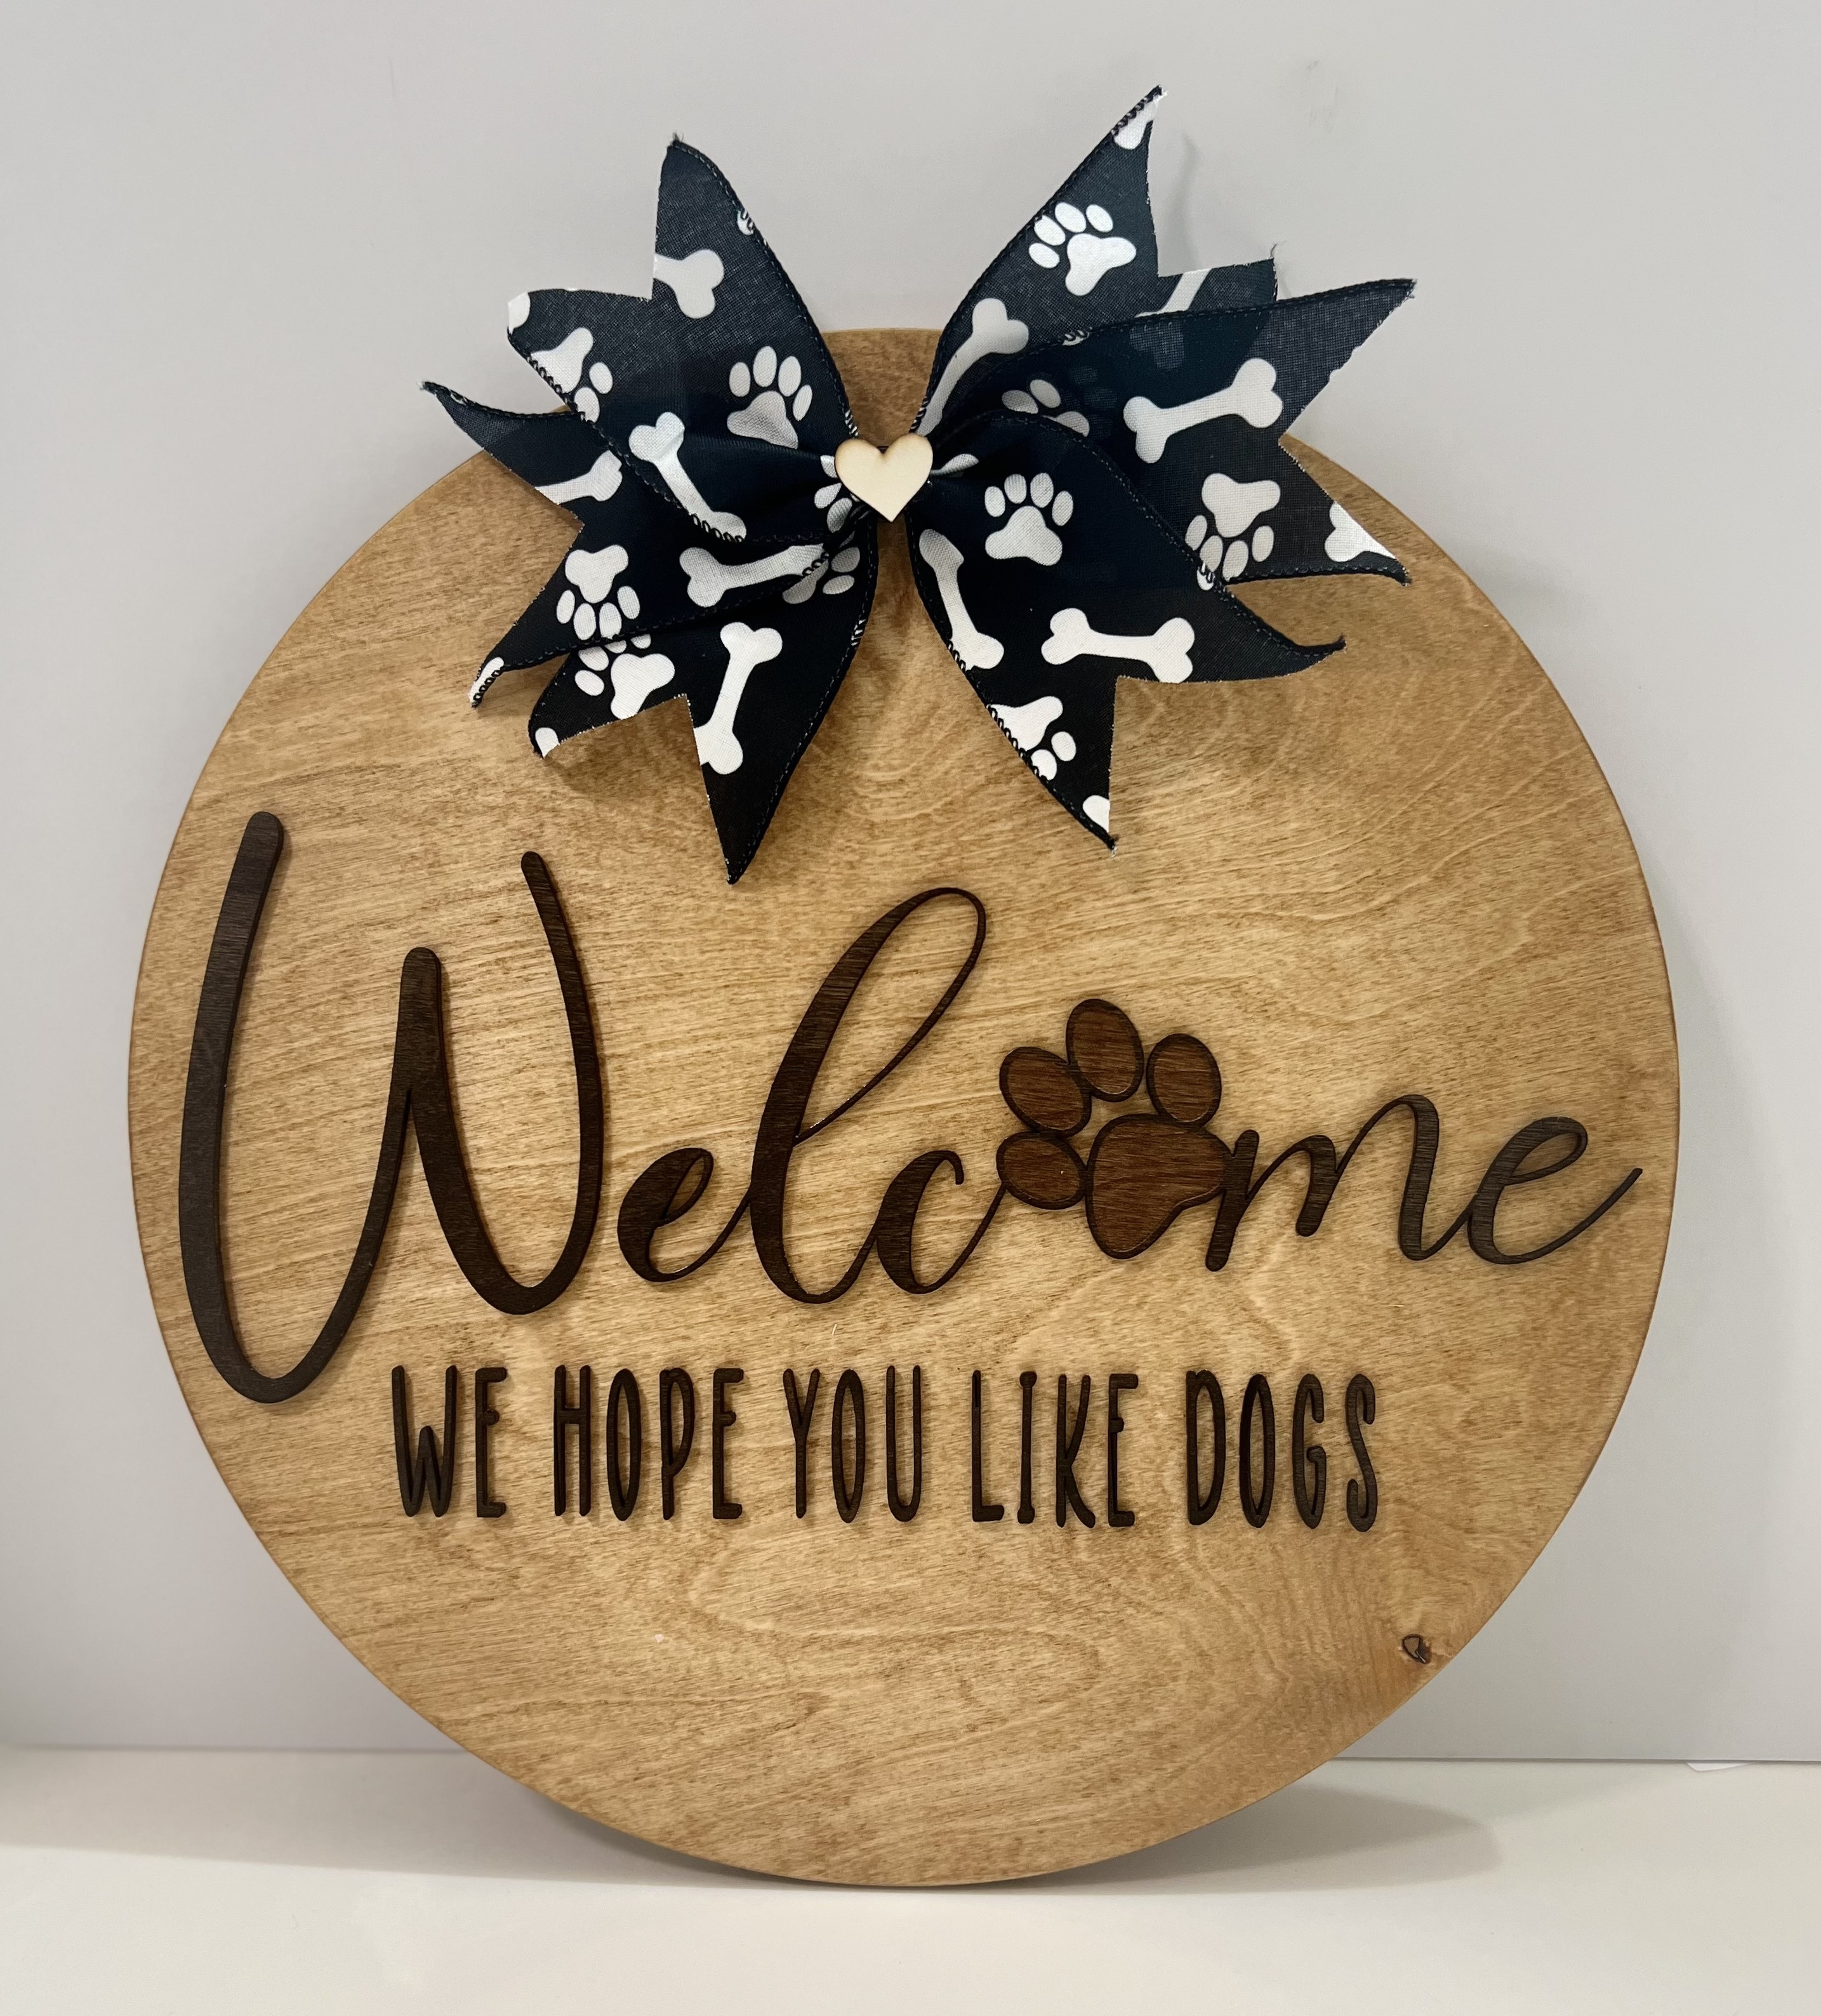 We Hope You Like Dogs Home Door Wreath with Interchangeable Bows